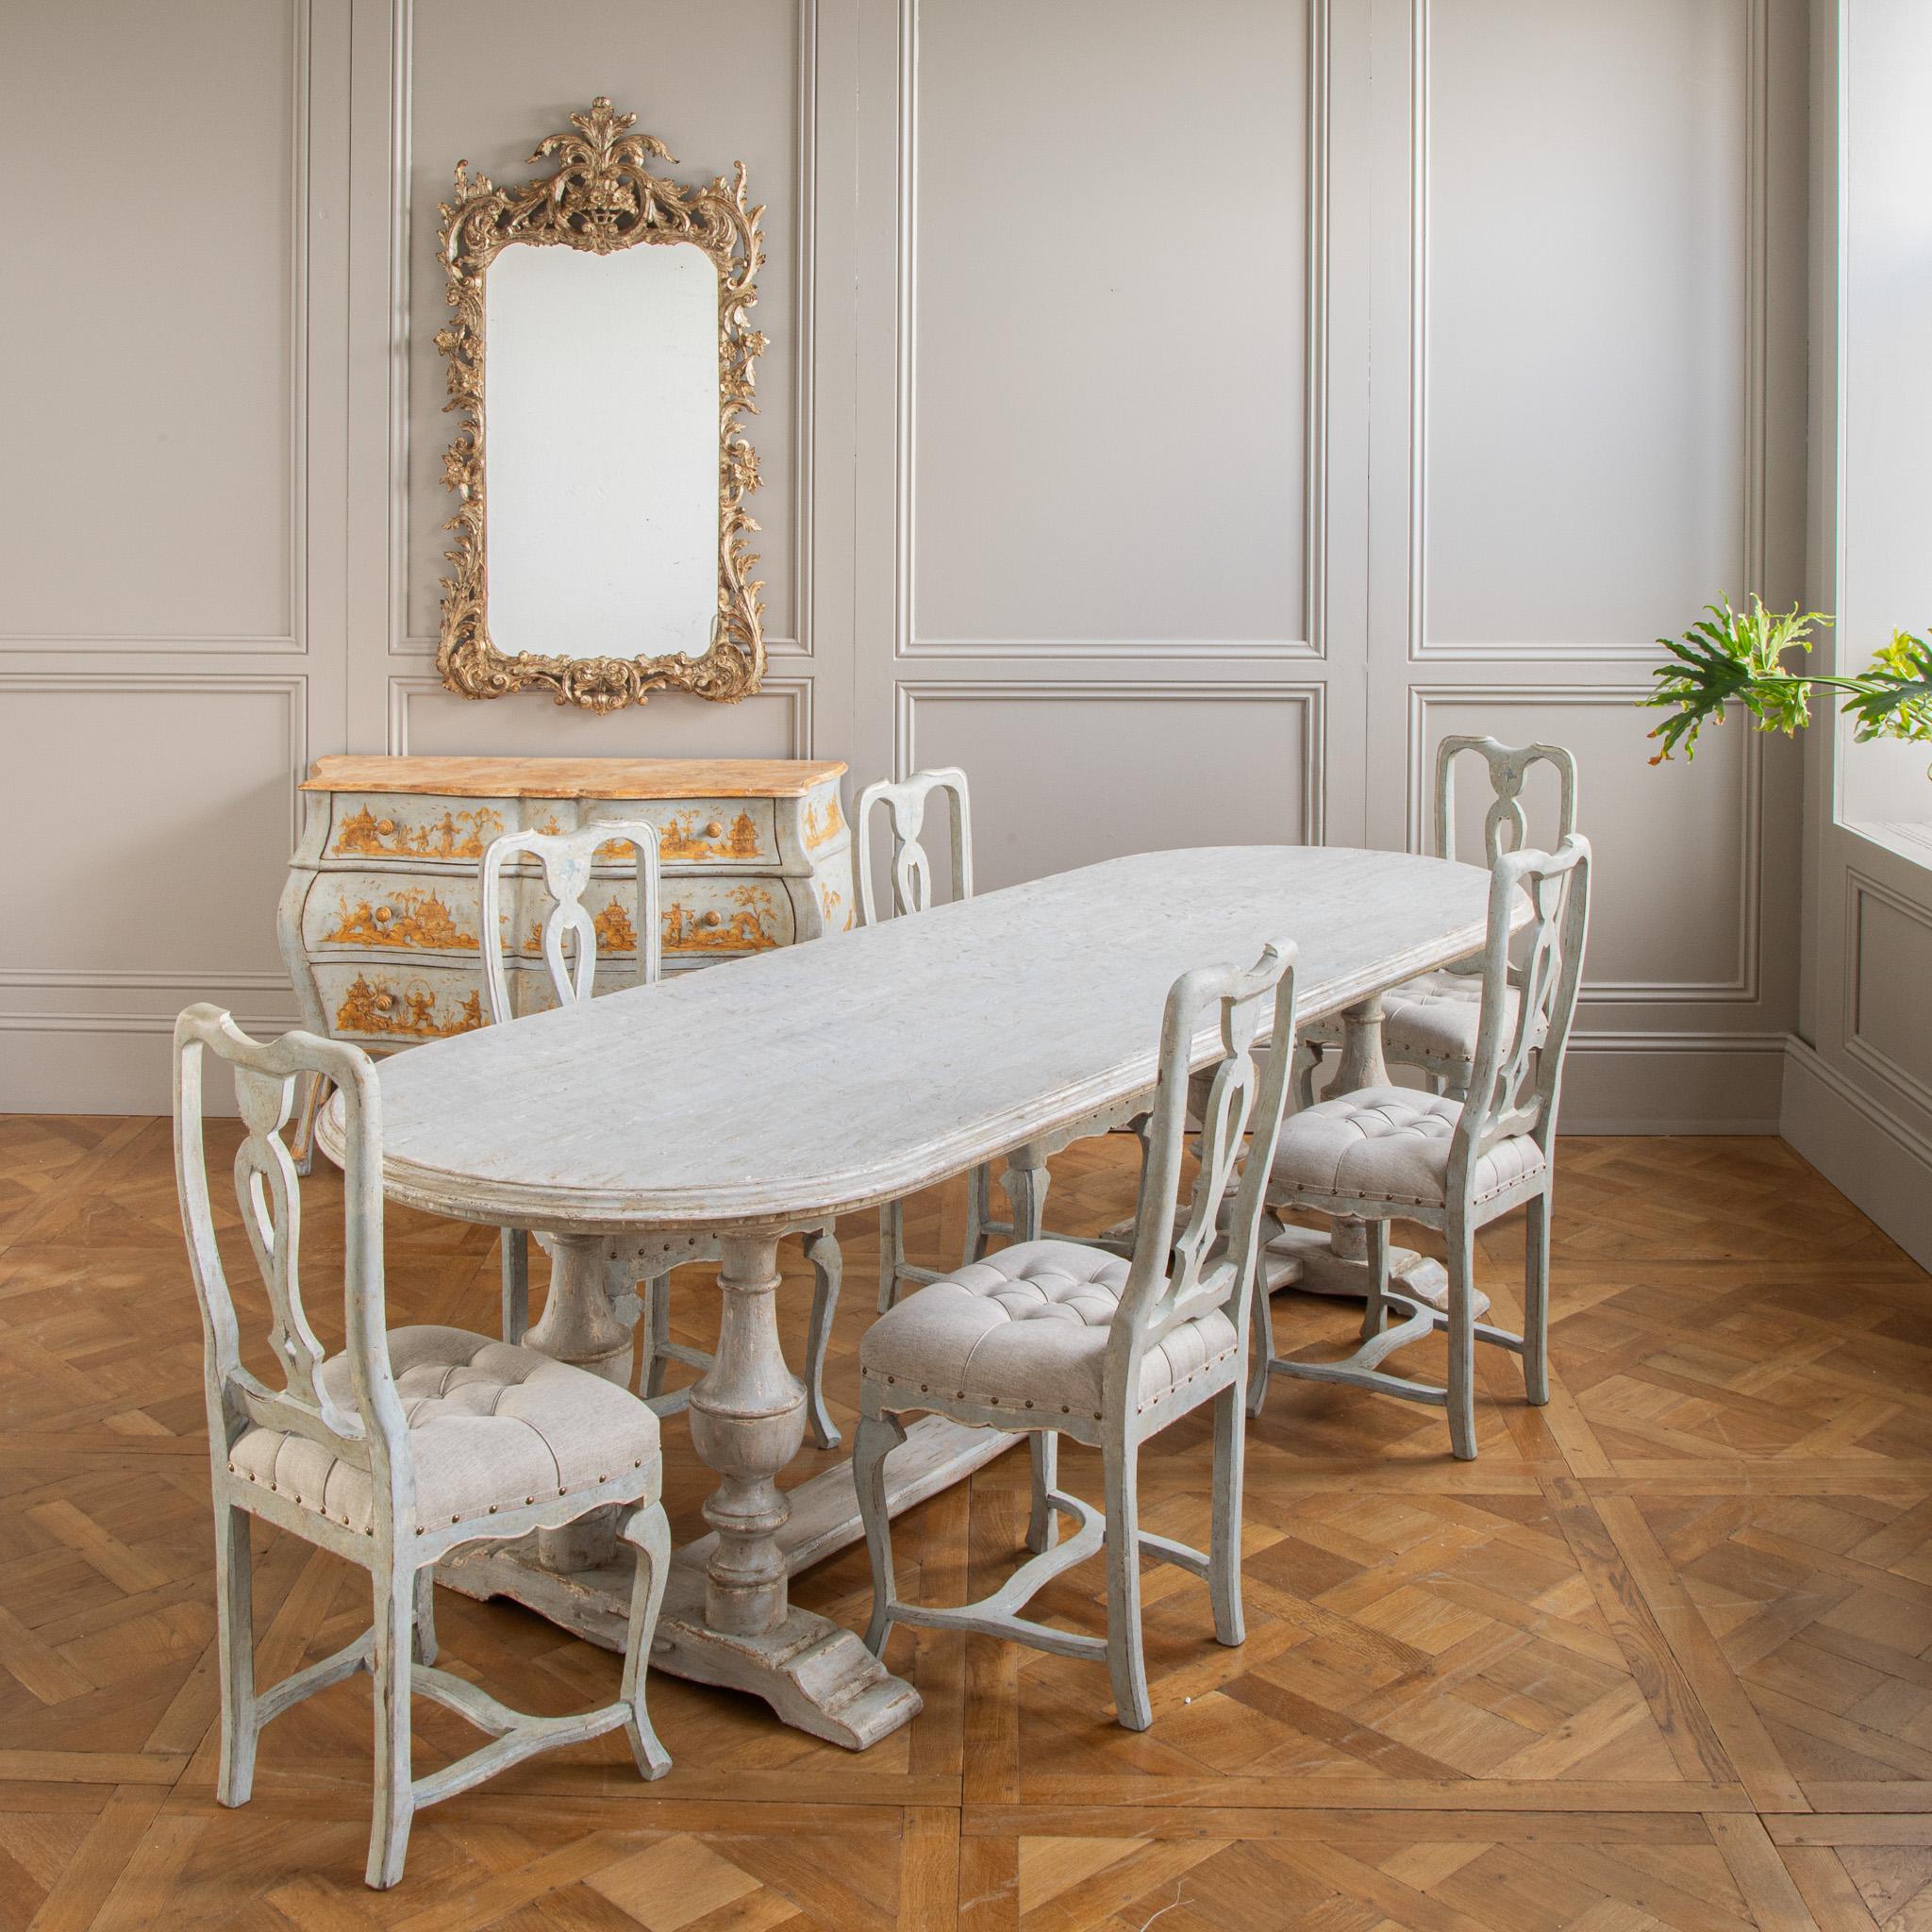 Indulge in a touch of rustic luxury with our Antique Italian Farmhouse Table. Bring the warmth of the Italian countryside into your home with this timeless piece.
The Table can be dismantled for transport (flat pack)